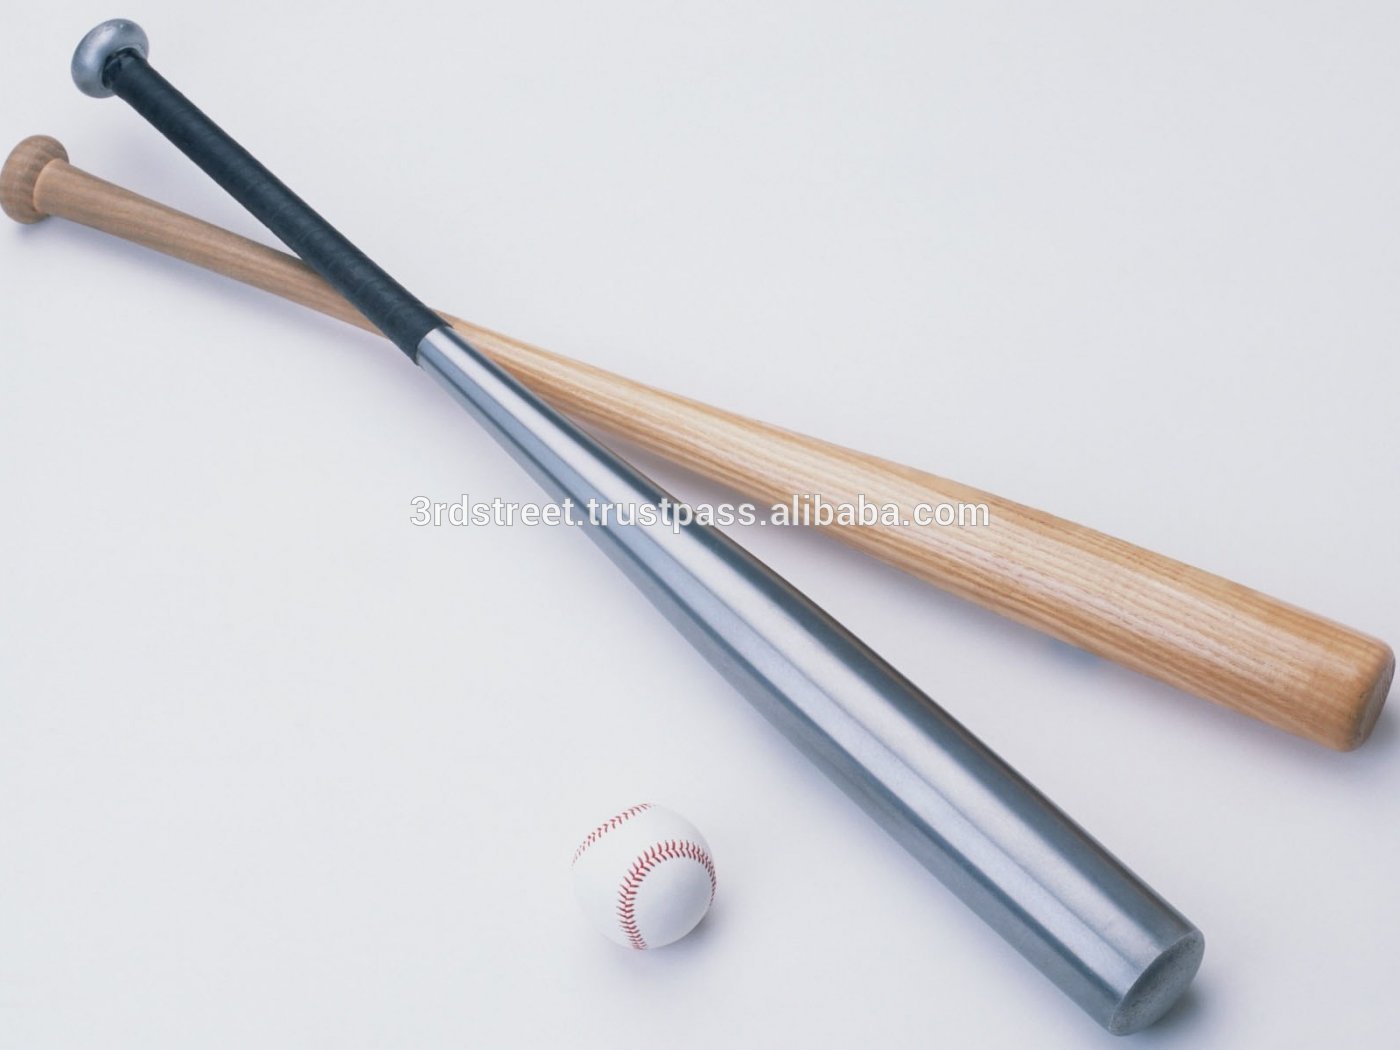 aseball Promotion Products at Low Price on Alibaba.com